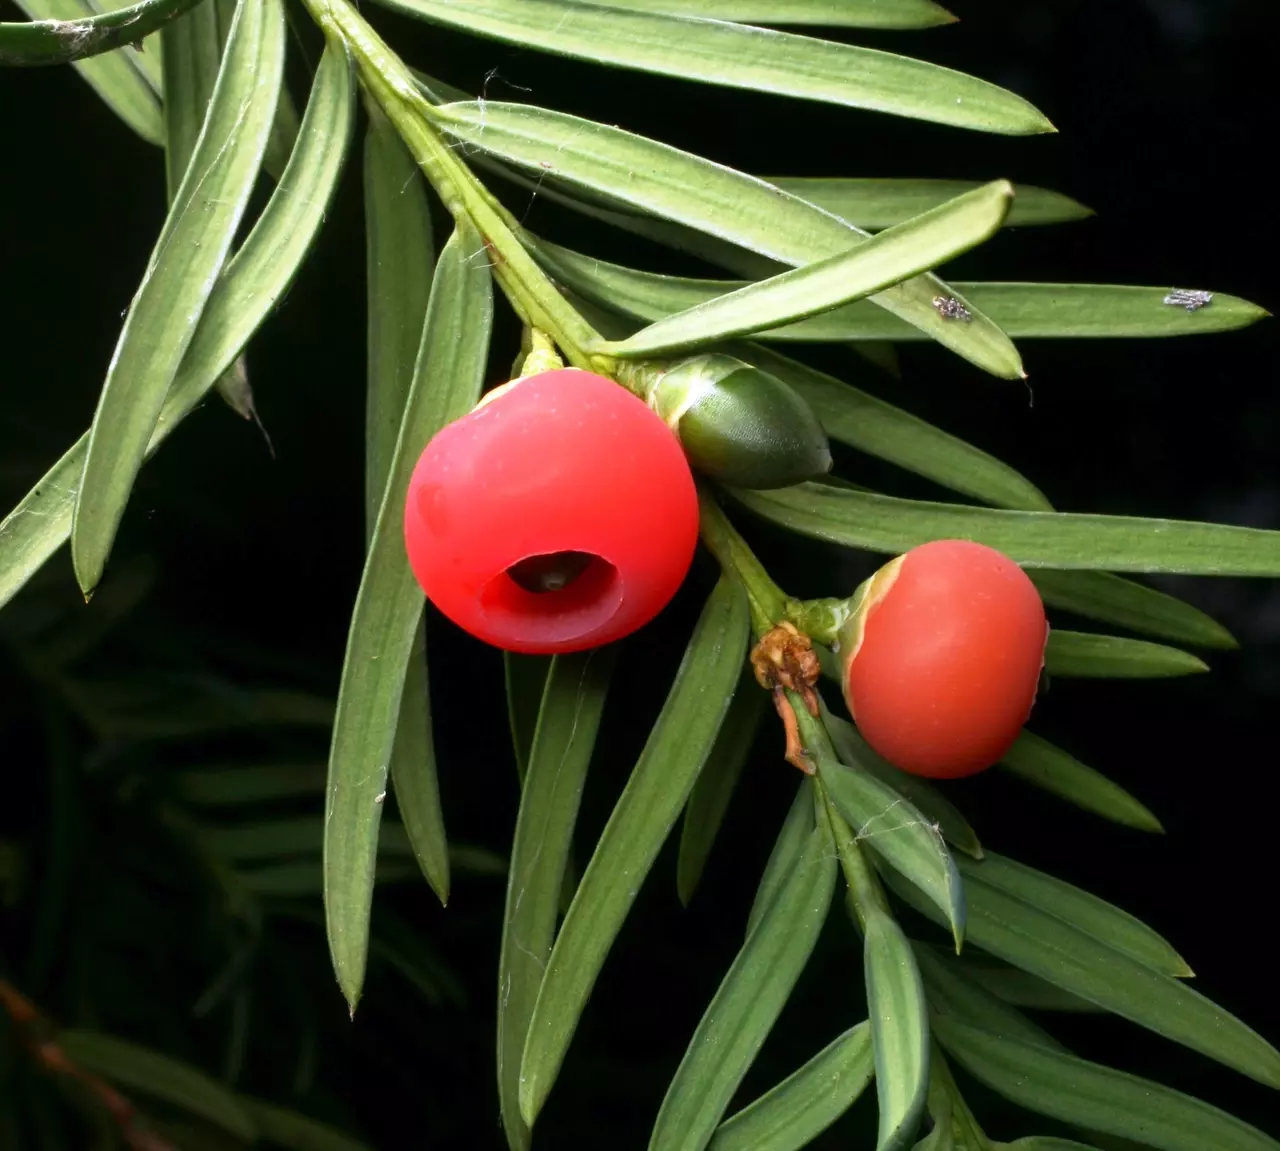 The poison in the yew’s bark, needles and seeds contains chemicals that can treat lung and breast cancer. So the tree really doesn’t deserve its dark reputation! 